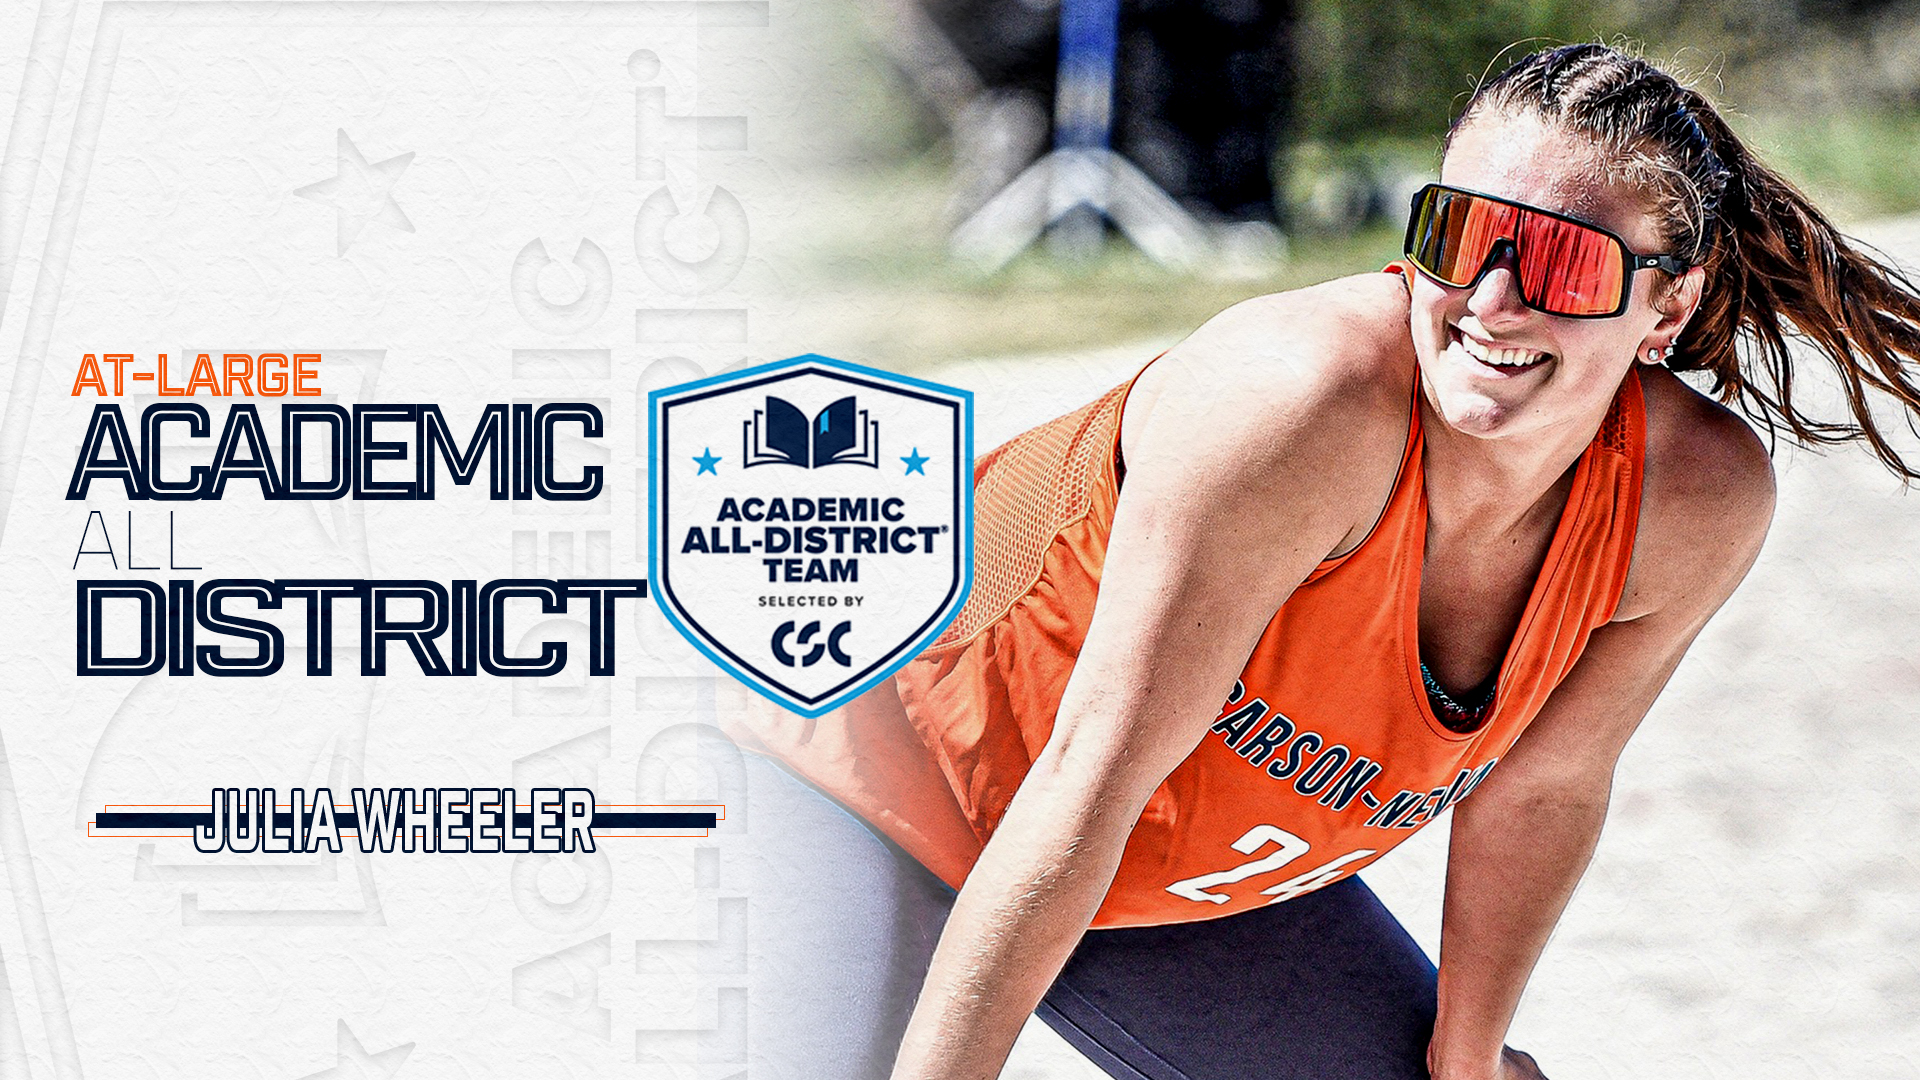 Quintet of beach volleyball players earns CSC Academic All-District At-Large honors